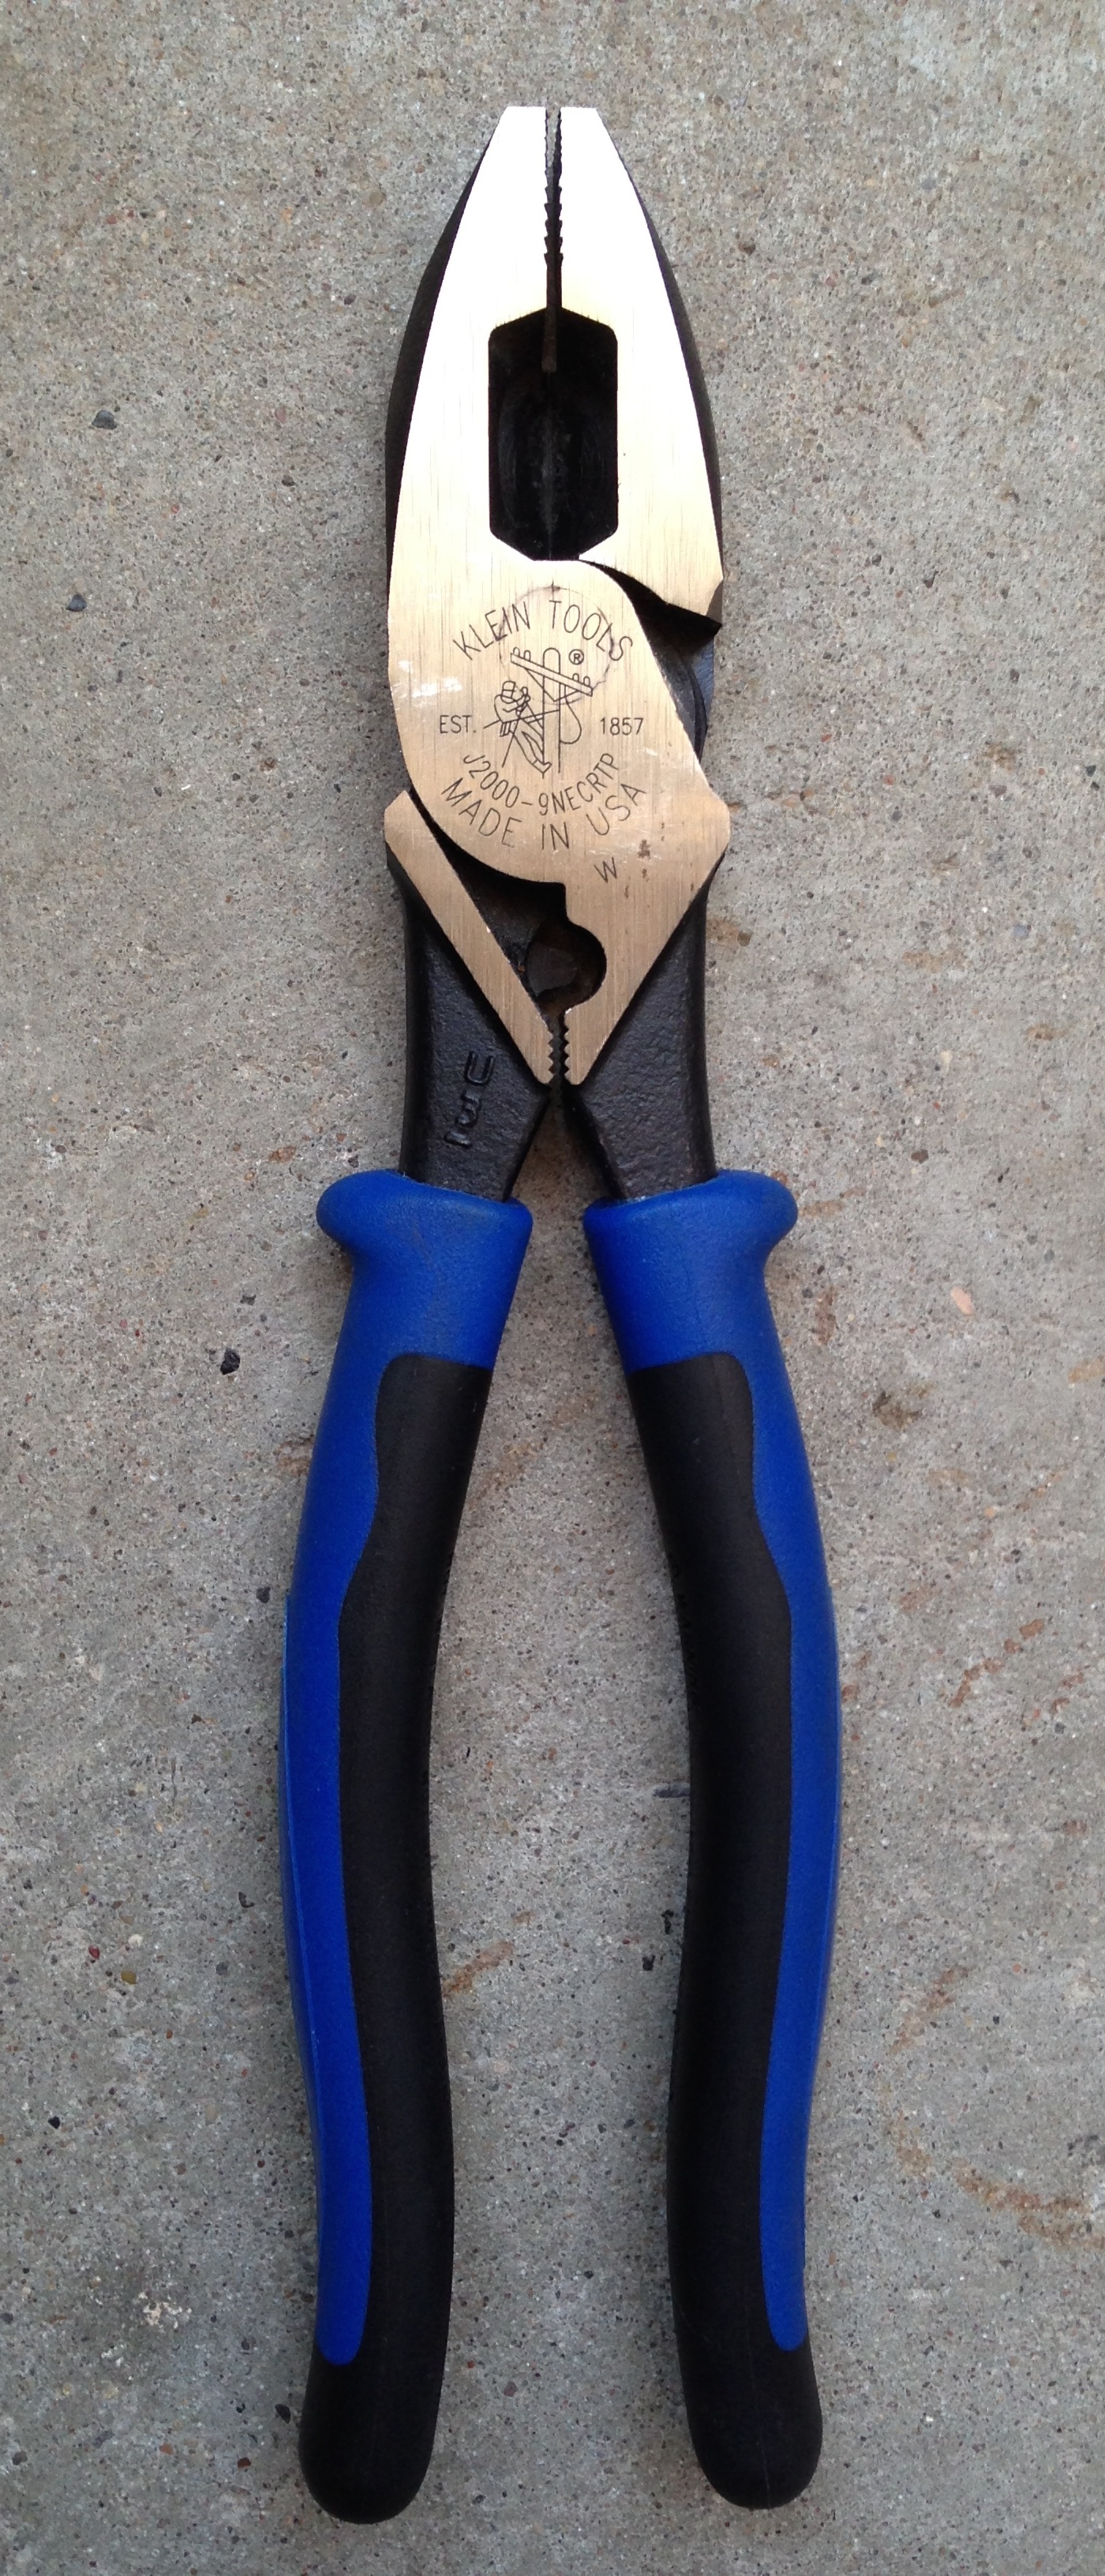 names of different types of pliers